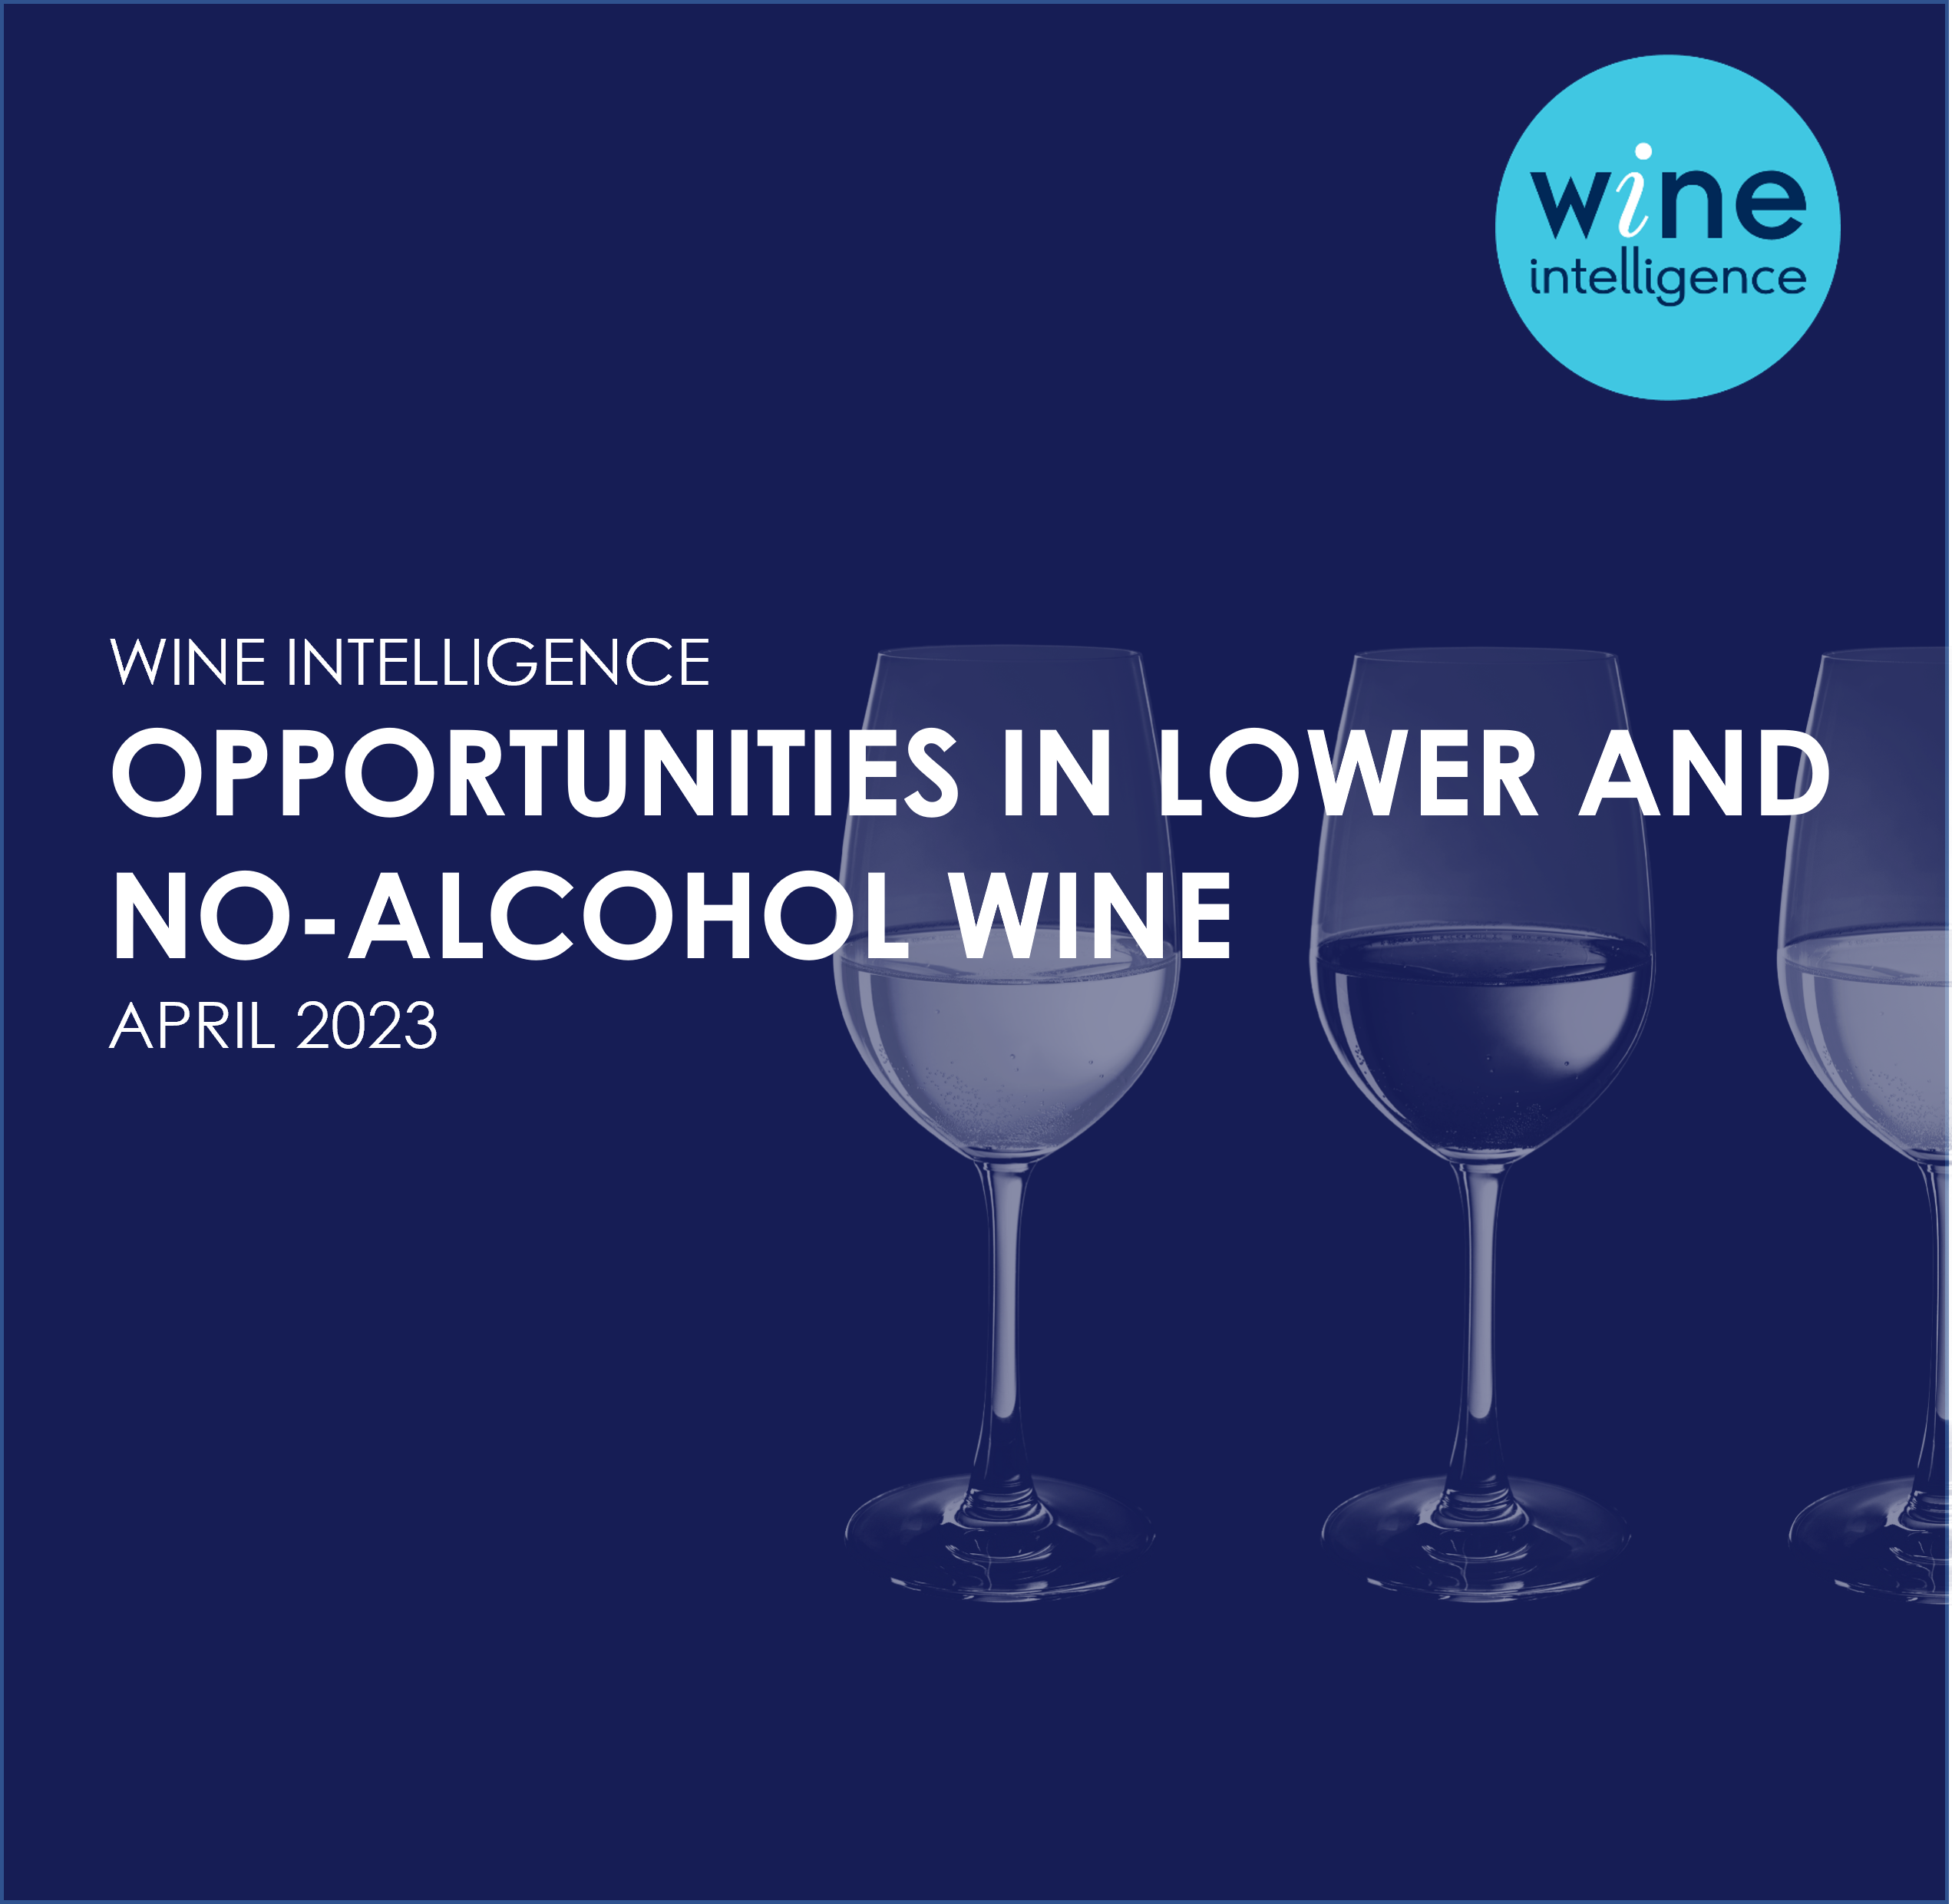 Opportunities in Lower and No alcohol wine 2023.jpg - Opportunities in Lower and No-Alcohol Wine 2023